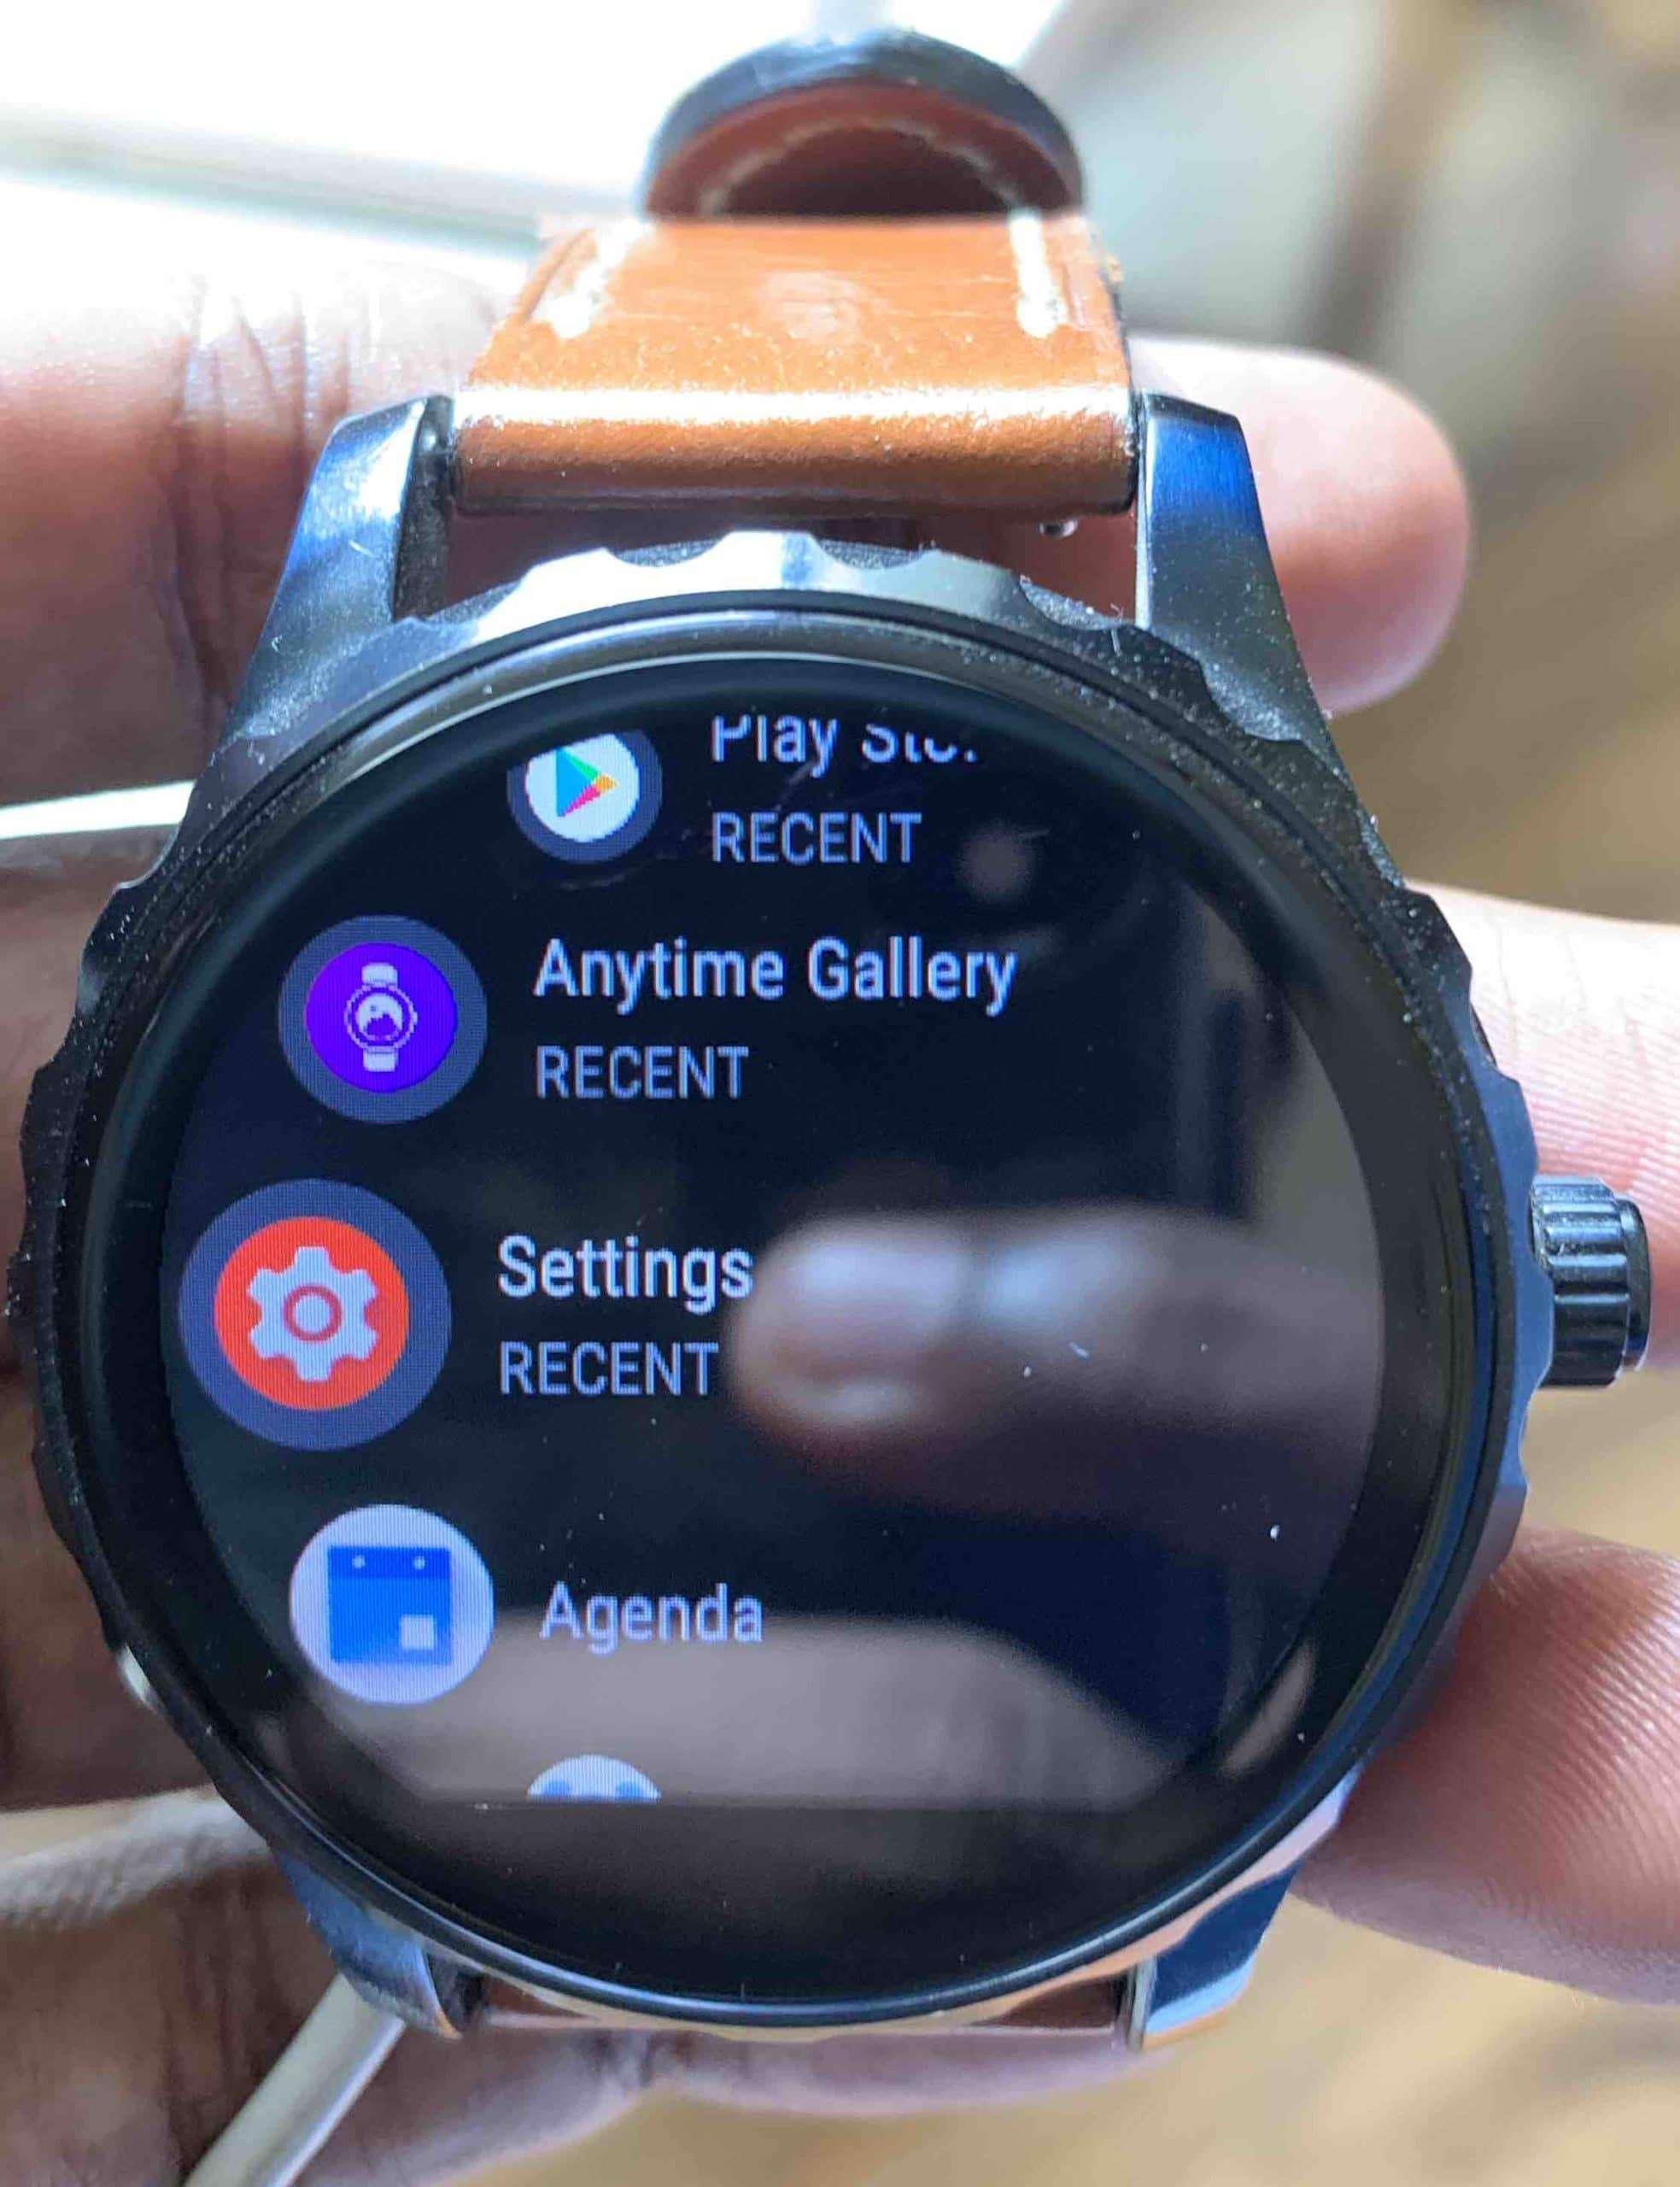 How to enable the screen lock on your Wear OS smartwatch